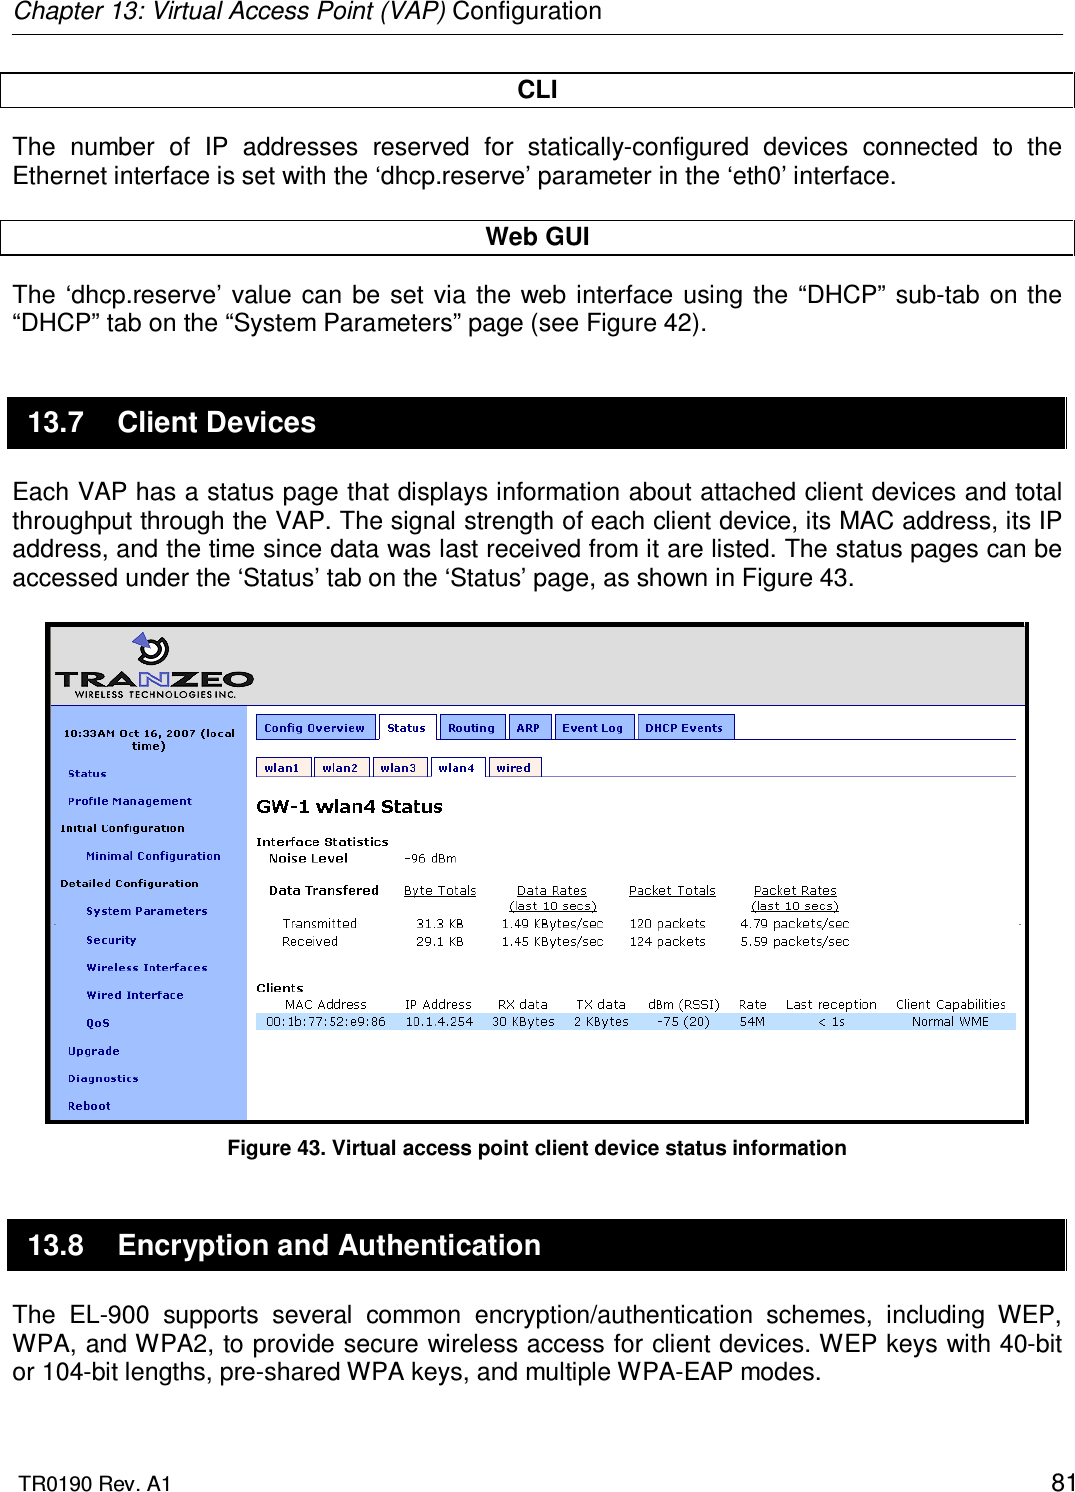 Chapter 13: Virtual Access Point (VAP) Configuration  TR0190 Rev. A1    81 CLI The  number  of  IP  addresses  reserved  for  statically-configured  devices  connected  to  the Ethernet interface is set with the ‘dhcp.reserve’ parameter in the ‘eth0’ interface.  Web GUI The  ‘dhcp.reserve’  value  can  be set  via  the web  interface  using  the  “DHCP”  sub-tab on the “DHCP” tab on the “System Parameters” page (see Figure 42).  13.7  Client Devices Each VAP has a status page that displays information about attached client devices and total throughput through the VAP. The signal strength of each client device, its MAC address, its IP address, and the time since data was last received from it are listed. The status pages can be accessed under the ‘Status’ tab on the ‘Status’ page, as shown in Figure 43.   Figure 43. Virtual access point client device status information 13.8  Encryption and Authentication The  EL-900  supports  several  common  encryption/authentication  schemes,  including  WEP, WPA, and WPA2, to provide secure wireless access for client devices. WEP keys with 40-bit or 104-bit lengths, pre-shared WPA keys, and multiple WPA-EAP modes.   